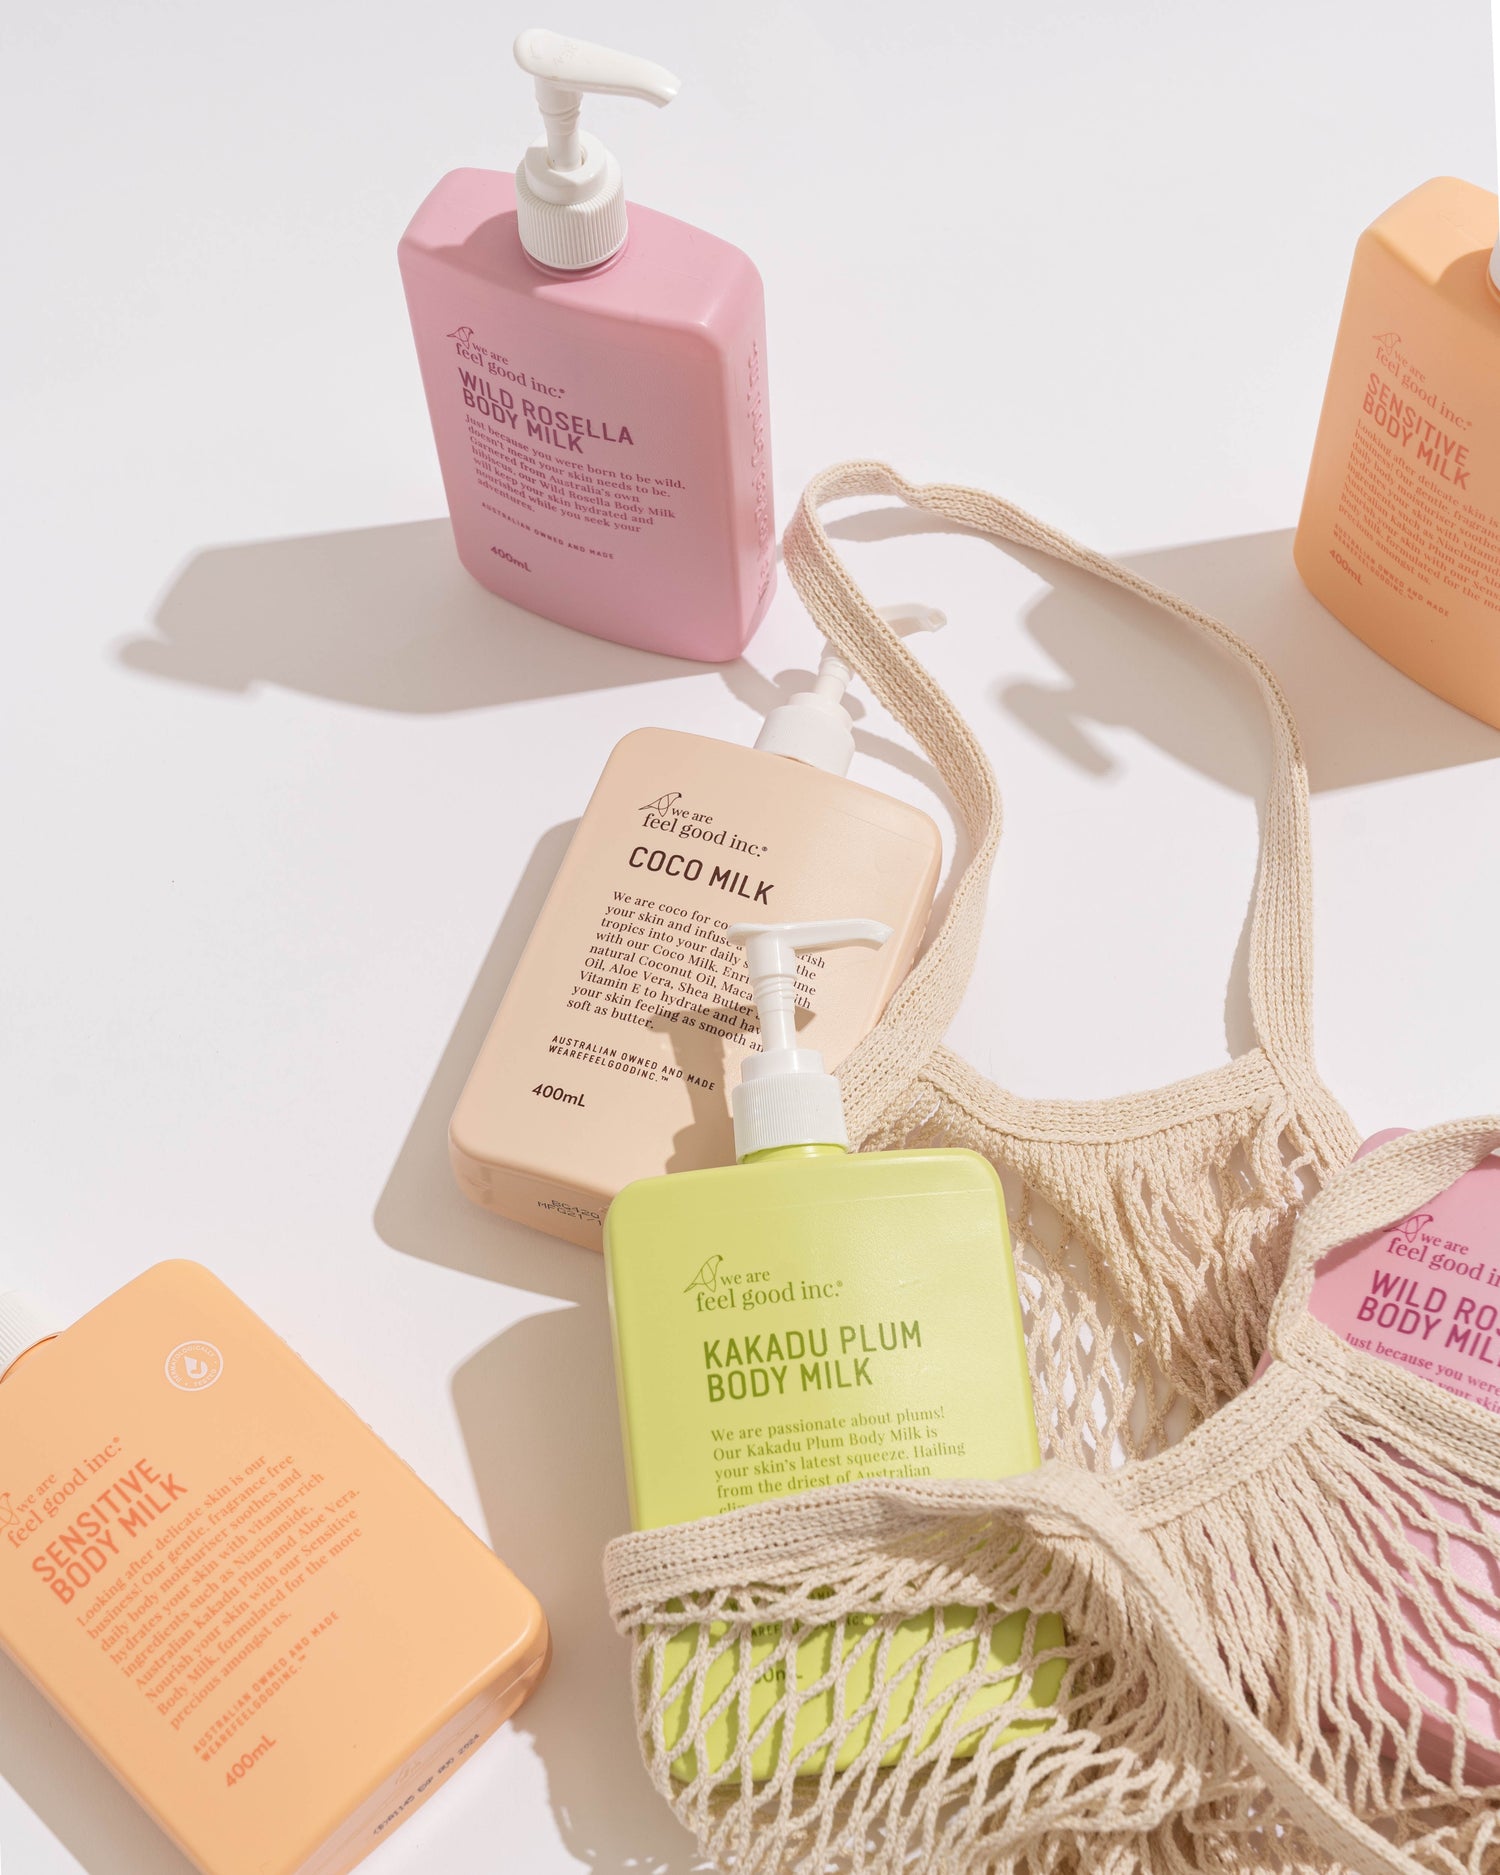 An array of We Are Feel Good Inc. body milk lotions in pink, peach, and beige, with a lime green one in a netted tote bag